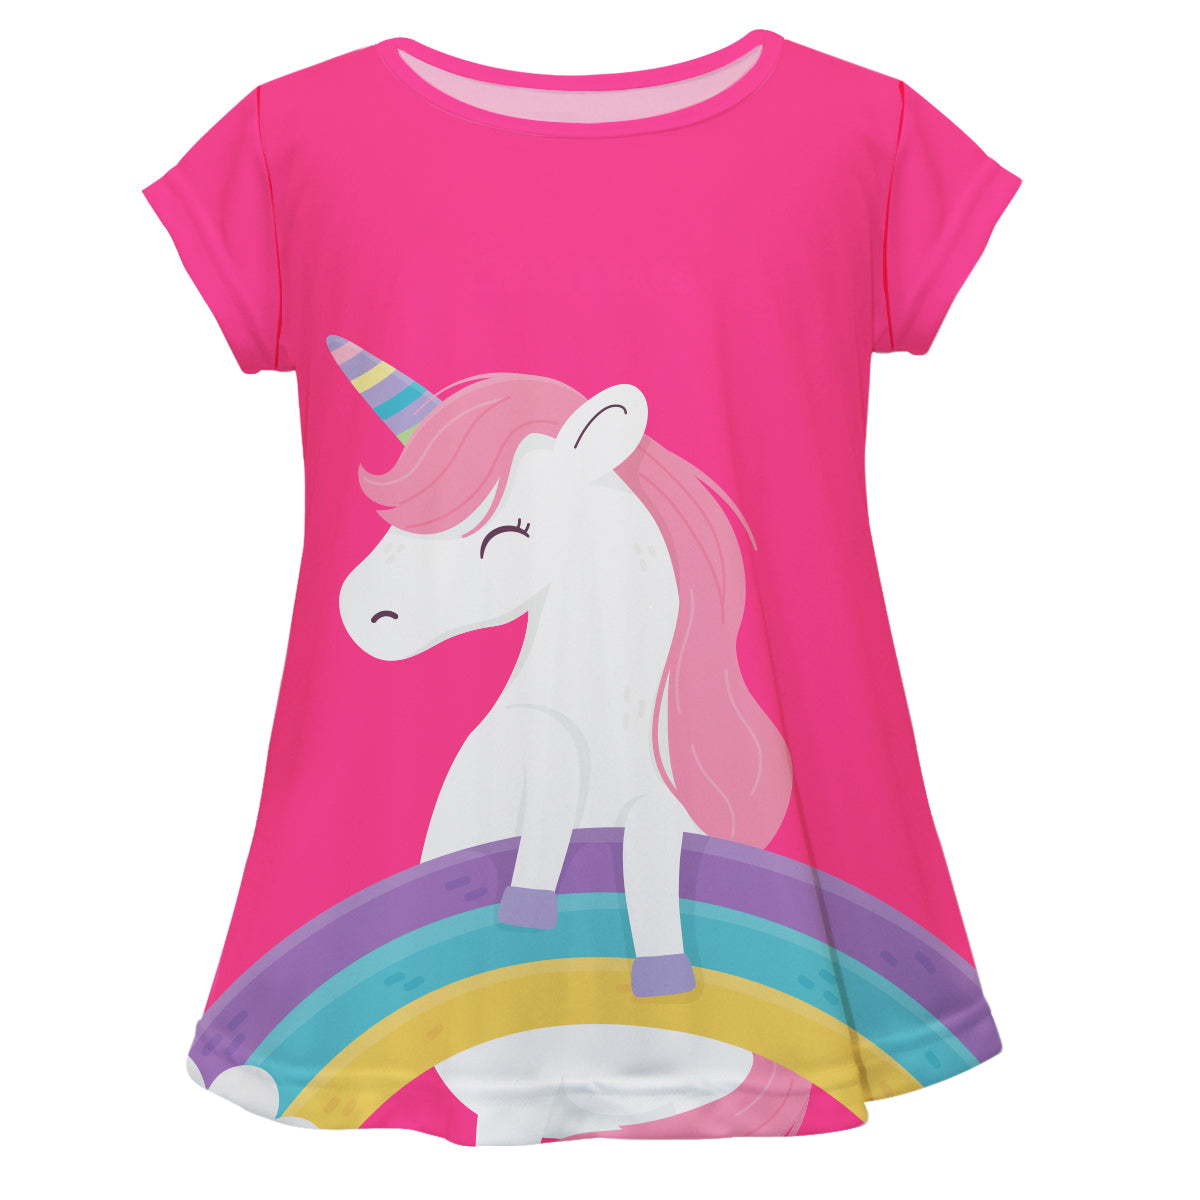 Unicorn Name Hot Pink Short Sleeve Laurie Top - Wimziy&Co.